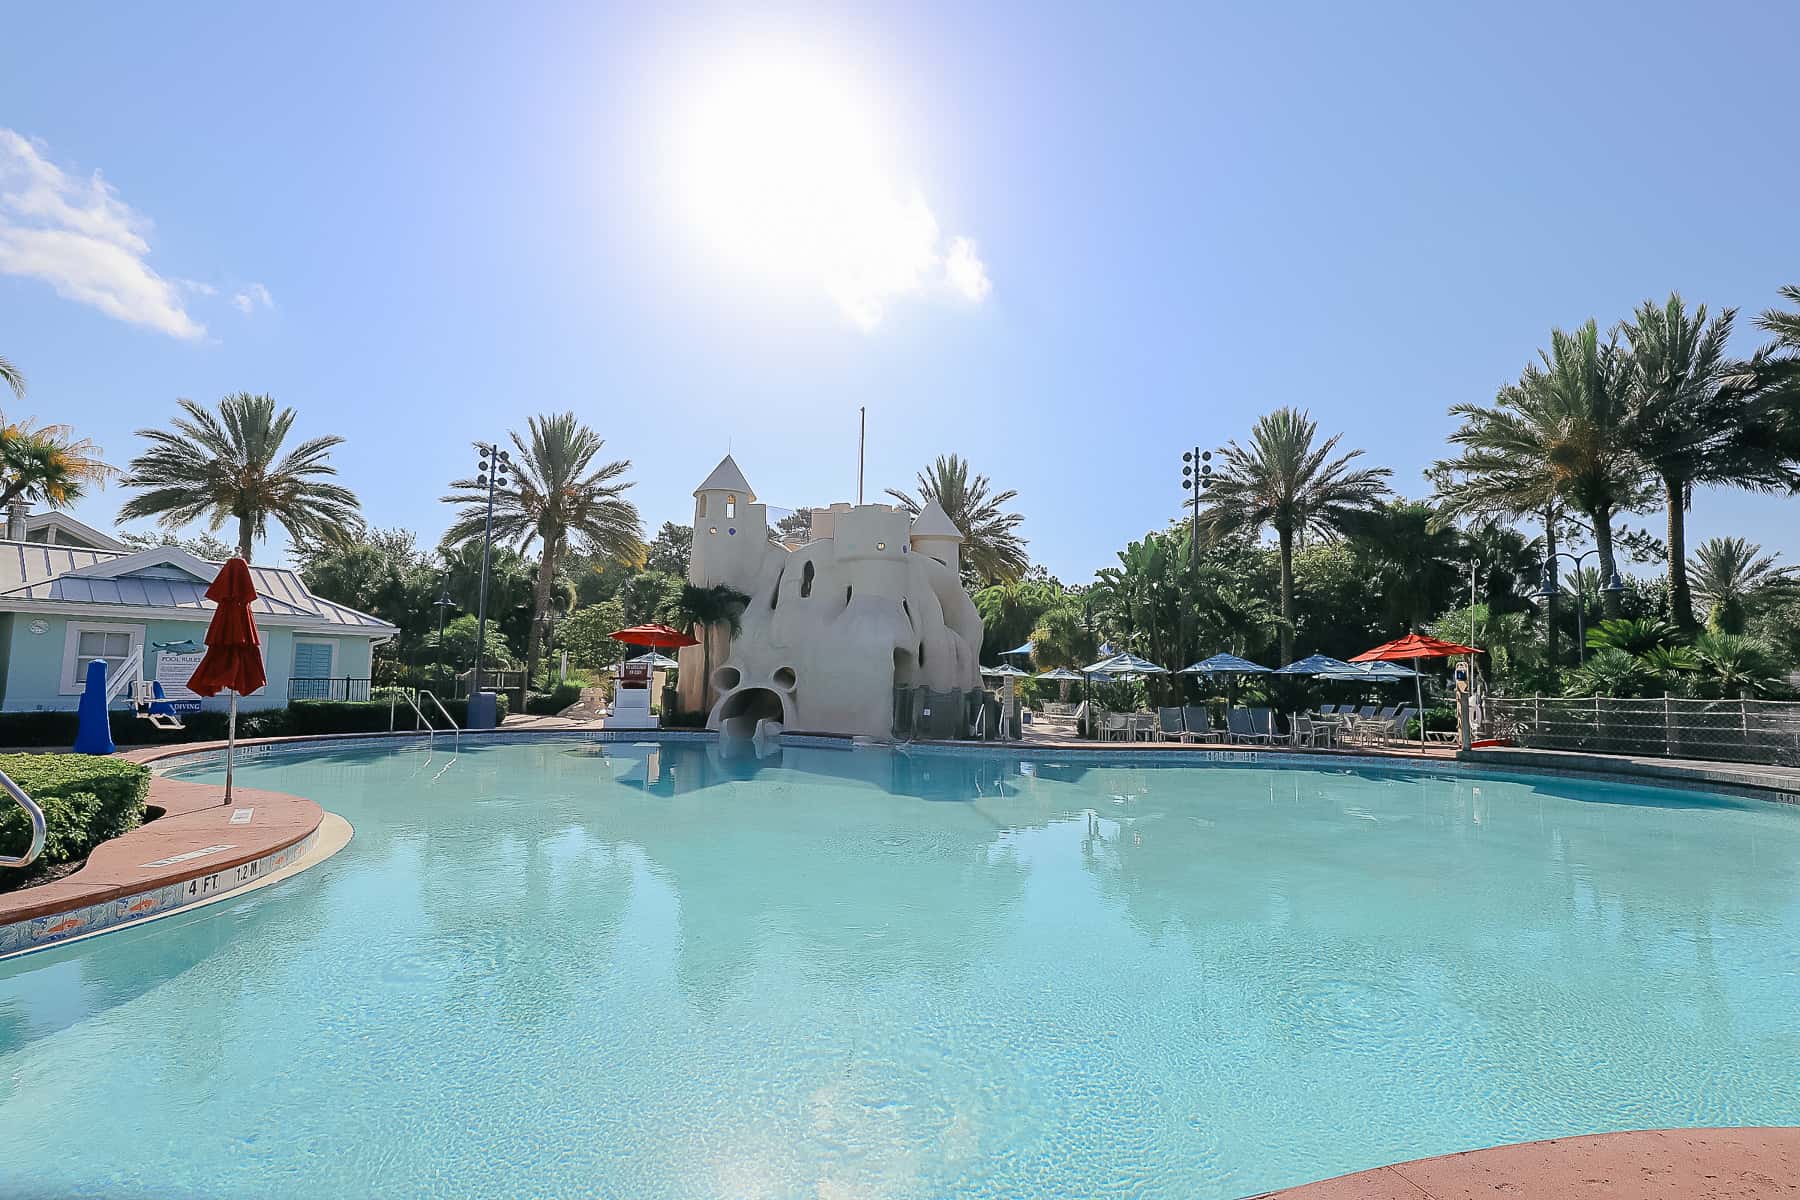 The Sandcastle Pool at Disney's Old Key West. 